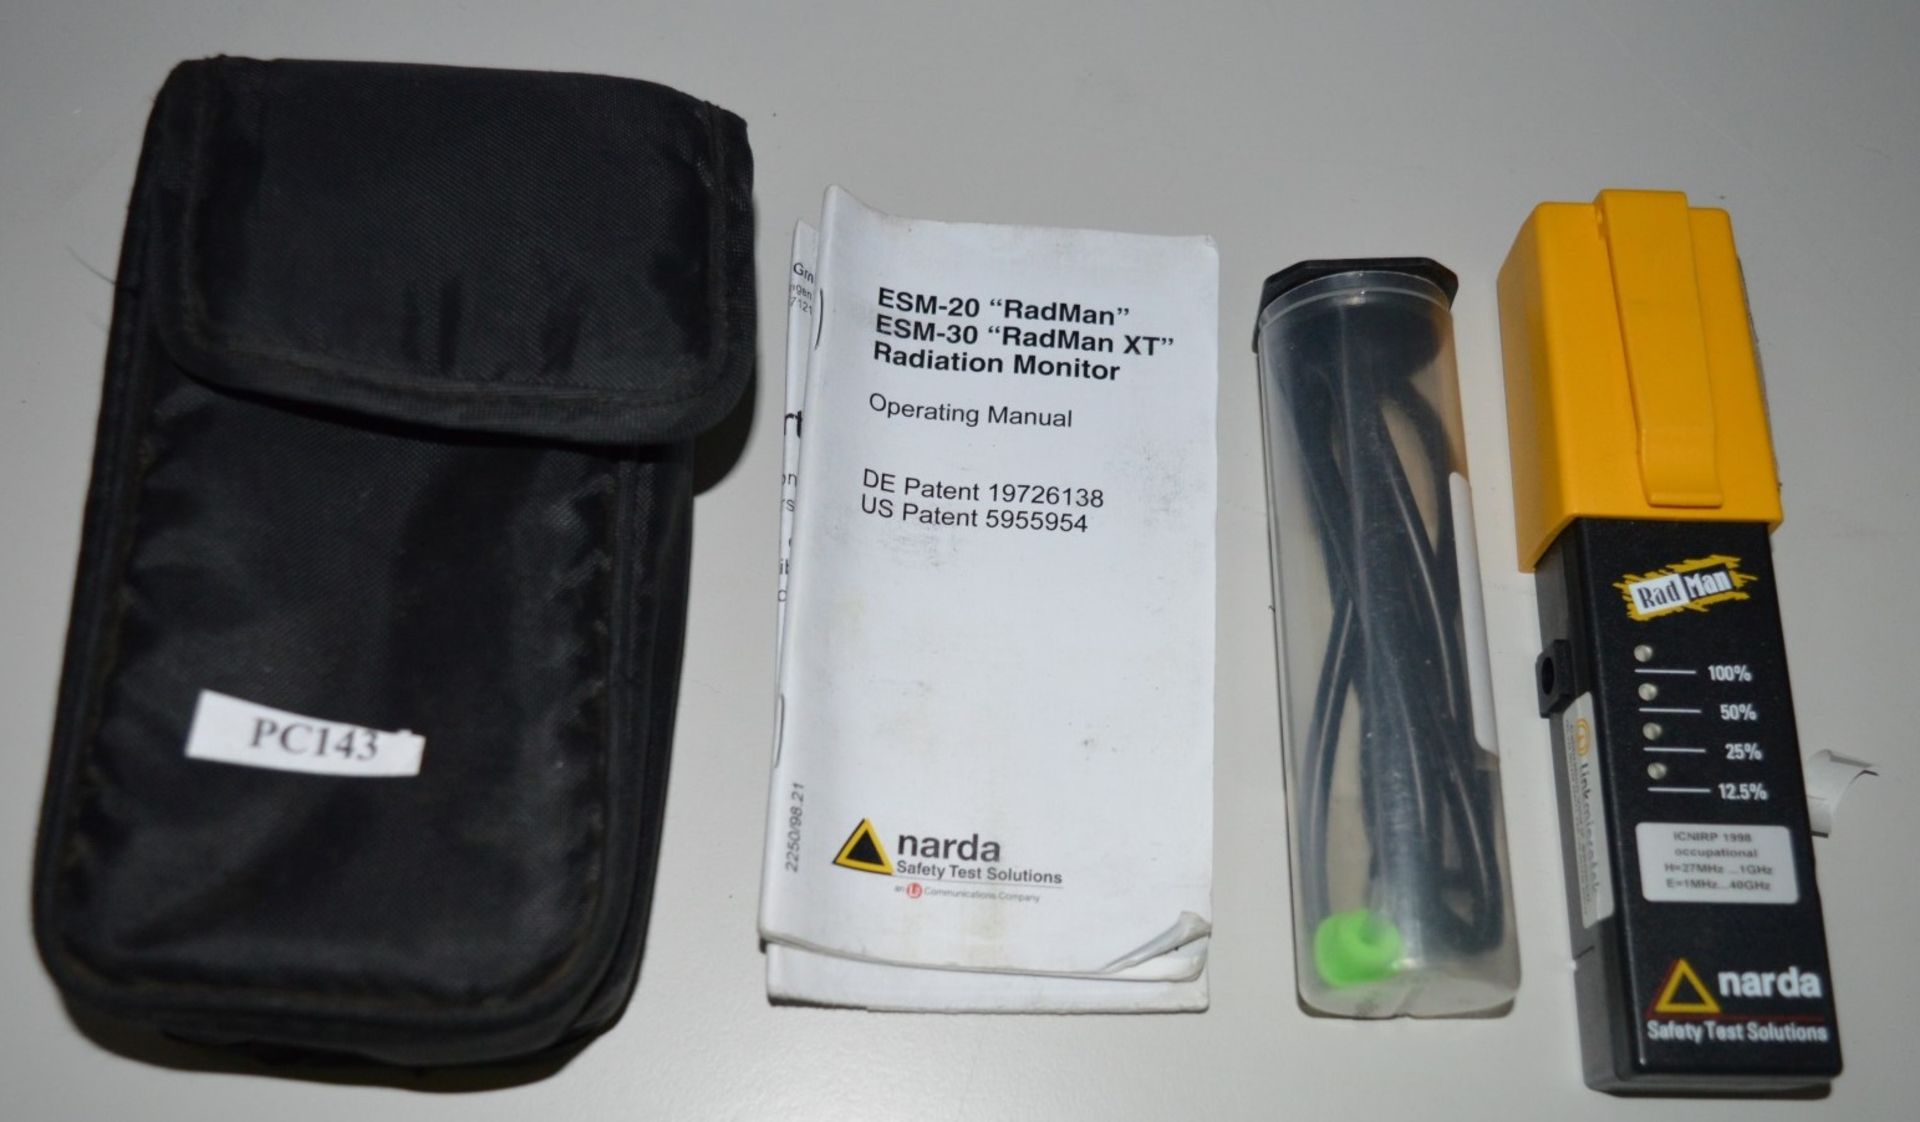 1 x Radman XT By Narda Personal RF Radiation Monitor - Part Number 2250/06 - Includes Case, - Image 2 of 6